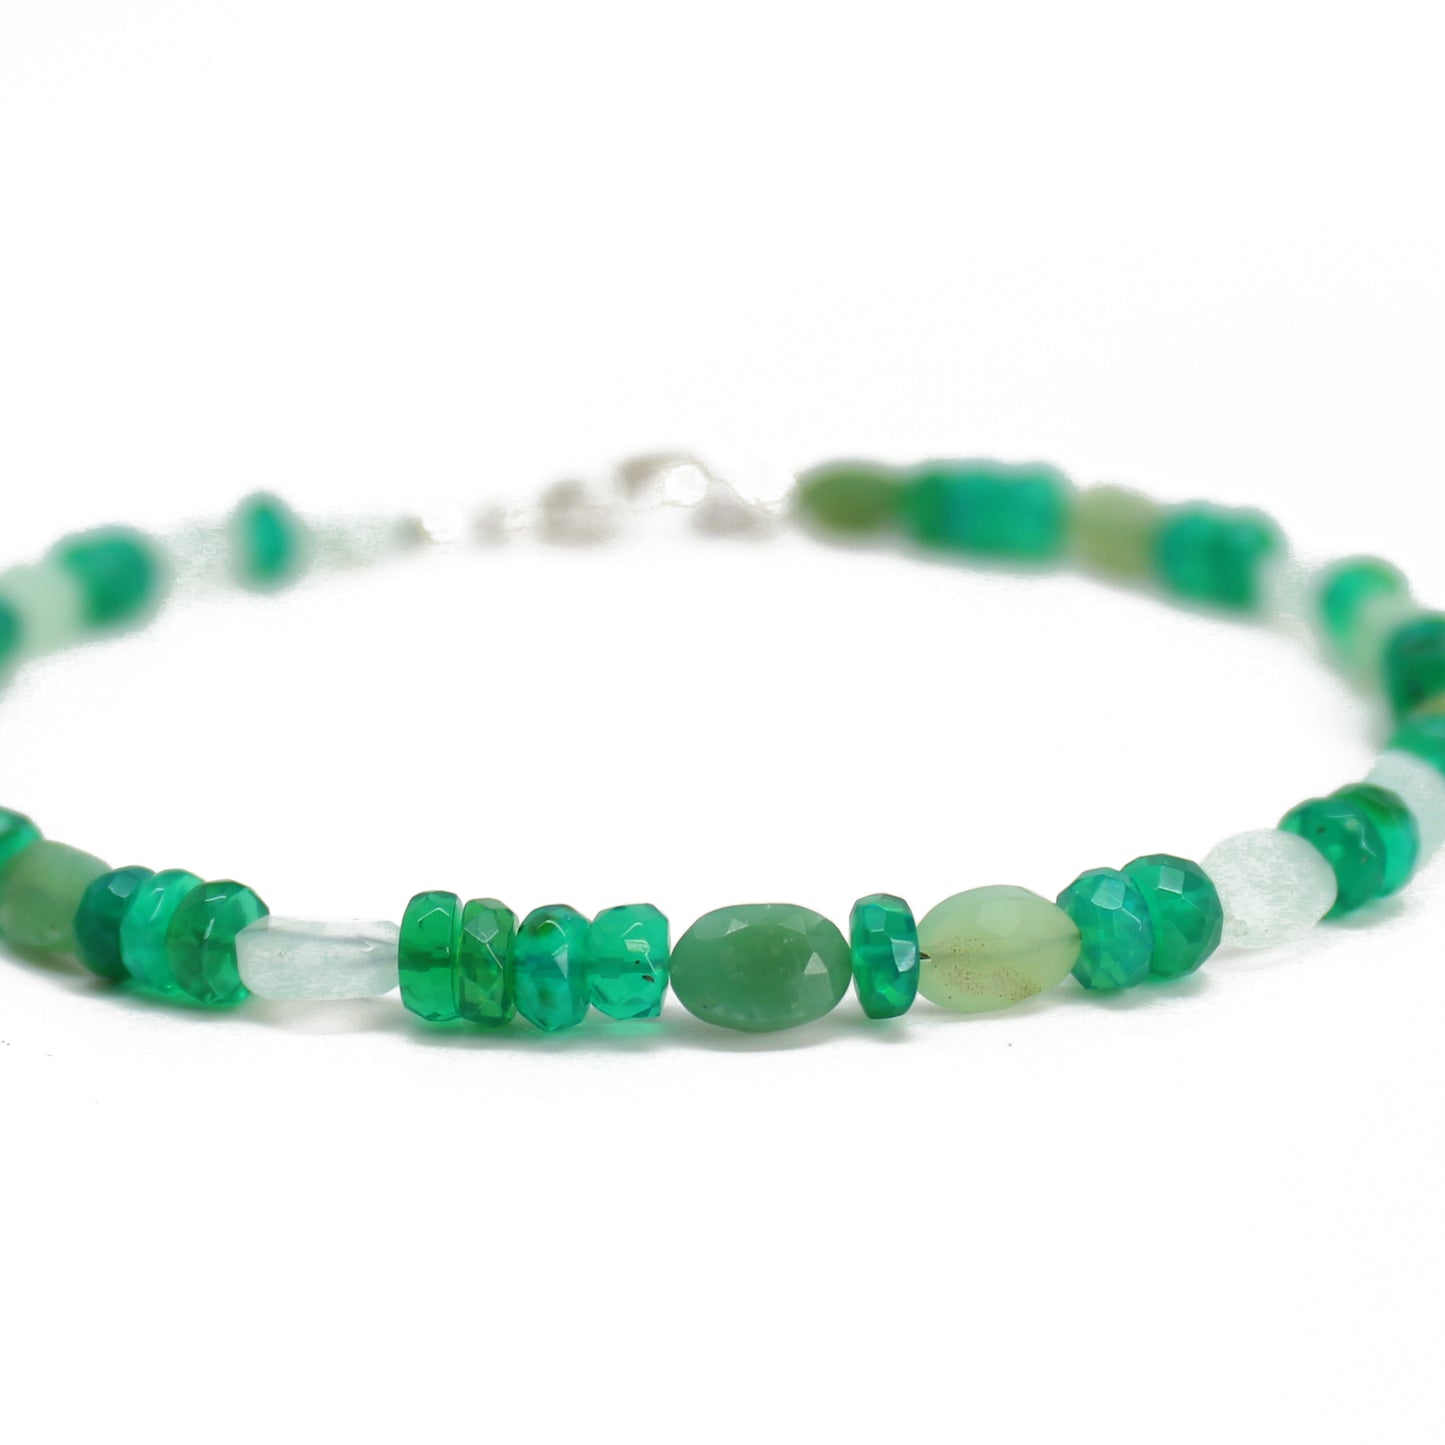 4384 - Round Bead Bracelet - CHRYSOPRASE - 8mm Beads - Twisted Thistle  Apothecary